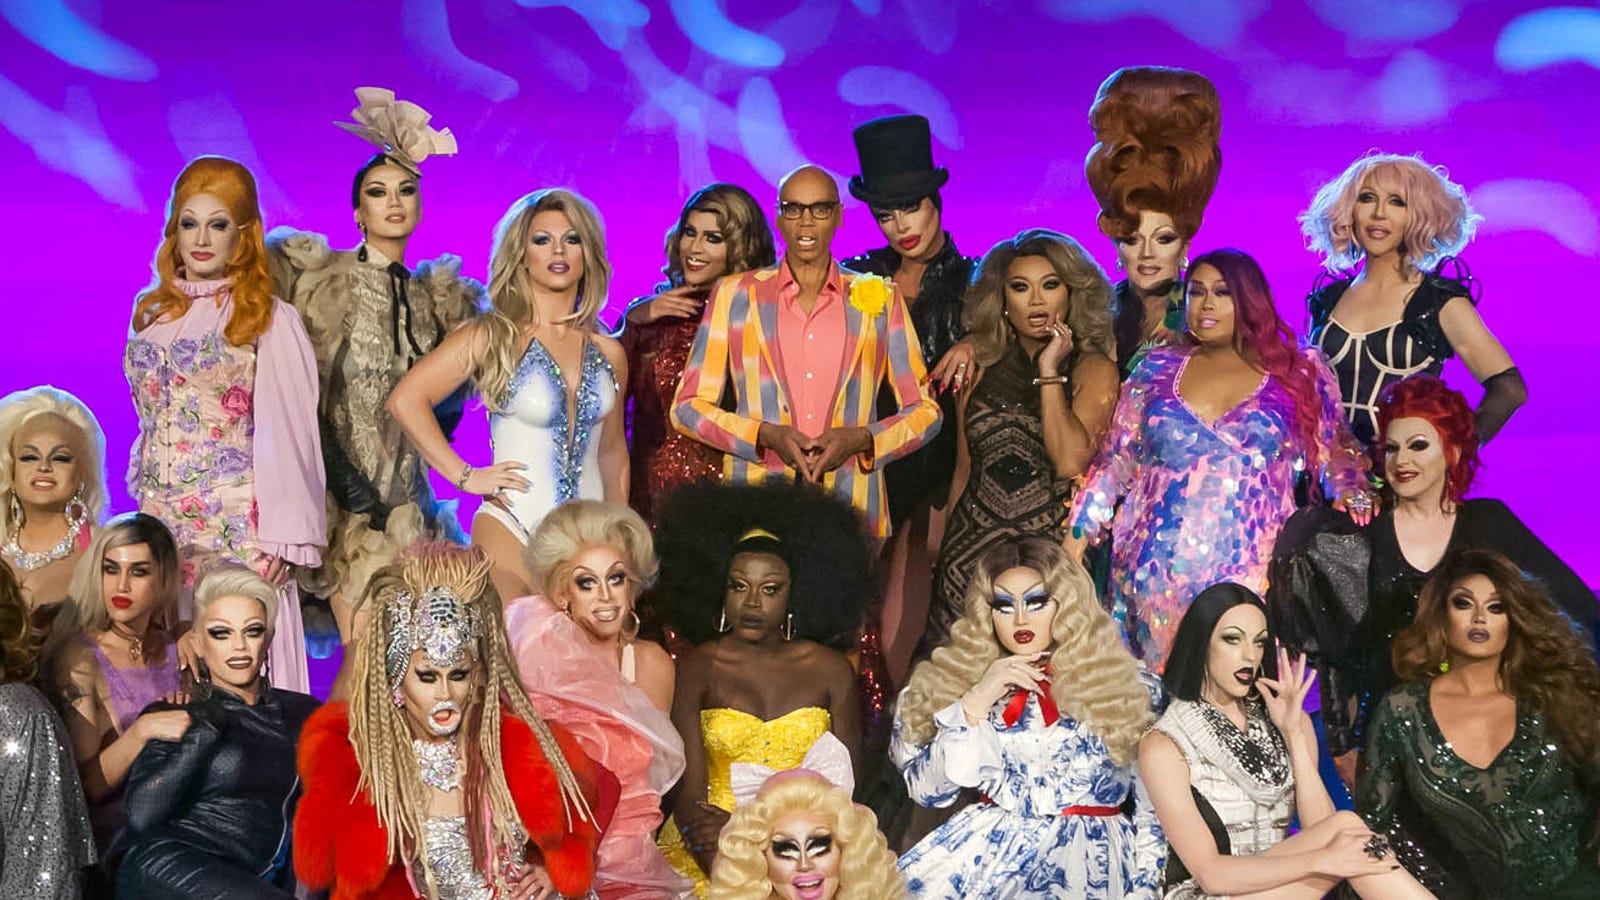 RuPaul’s Drag Race delivers 10s across the board with an exhilarating premiere1600 x 900